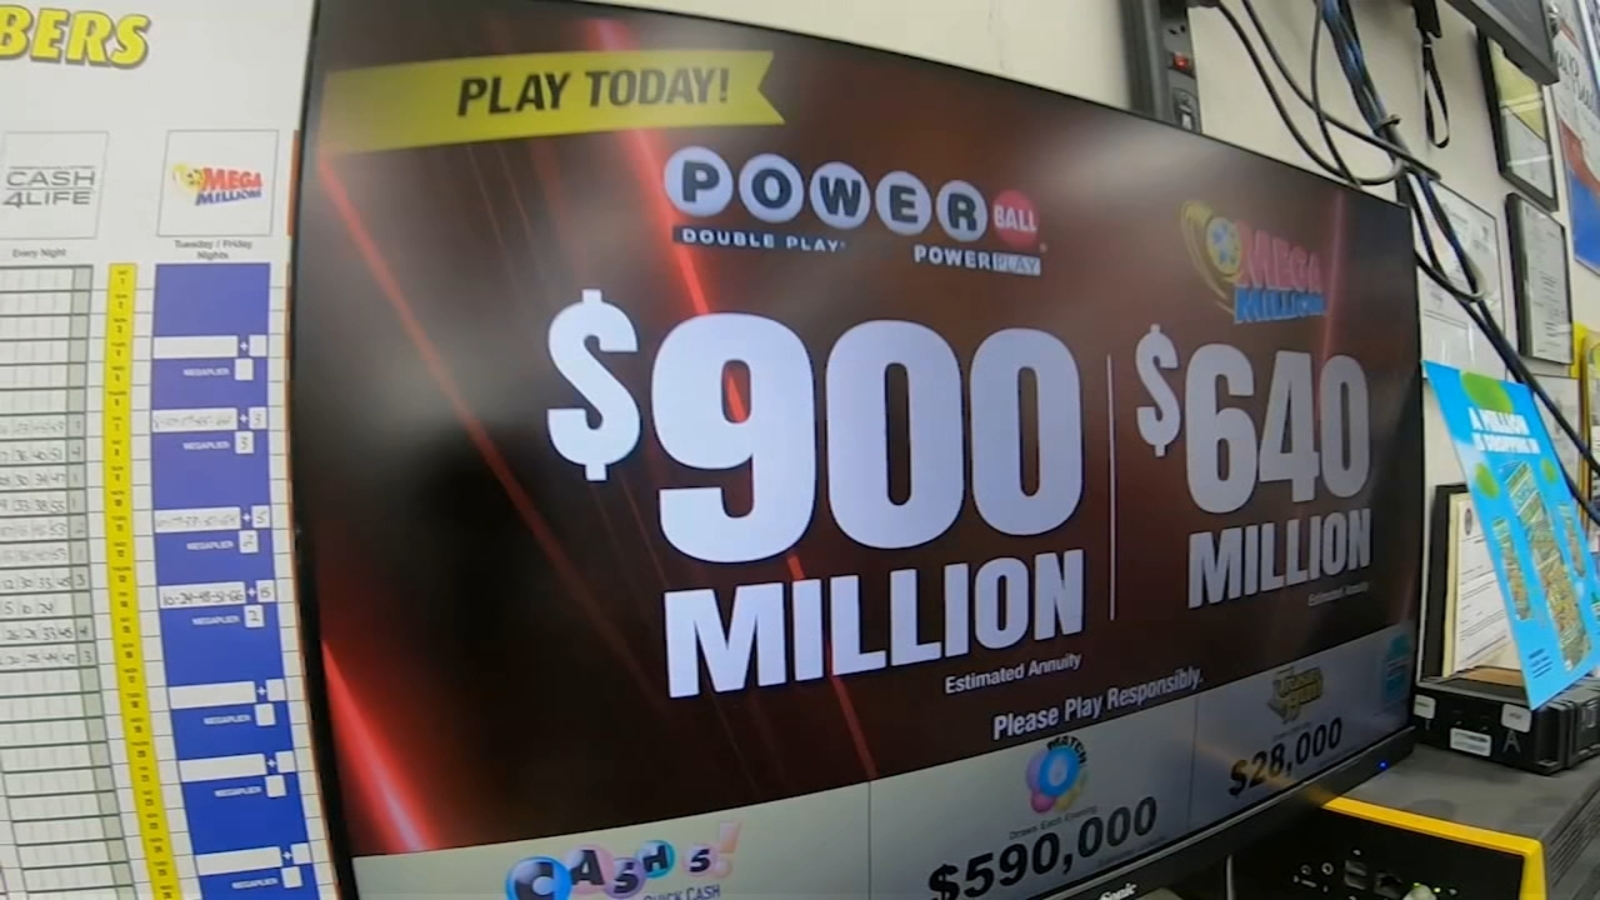 Powerball numbers drawing tonight: $900M jackpot up for grabs